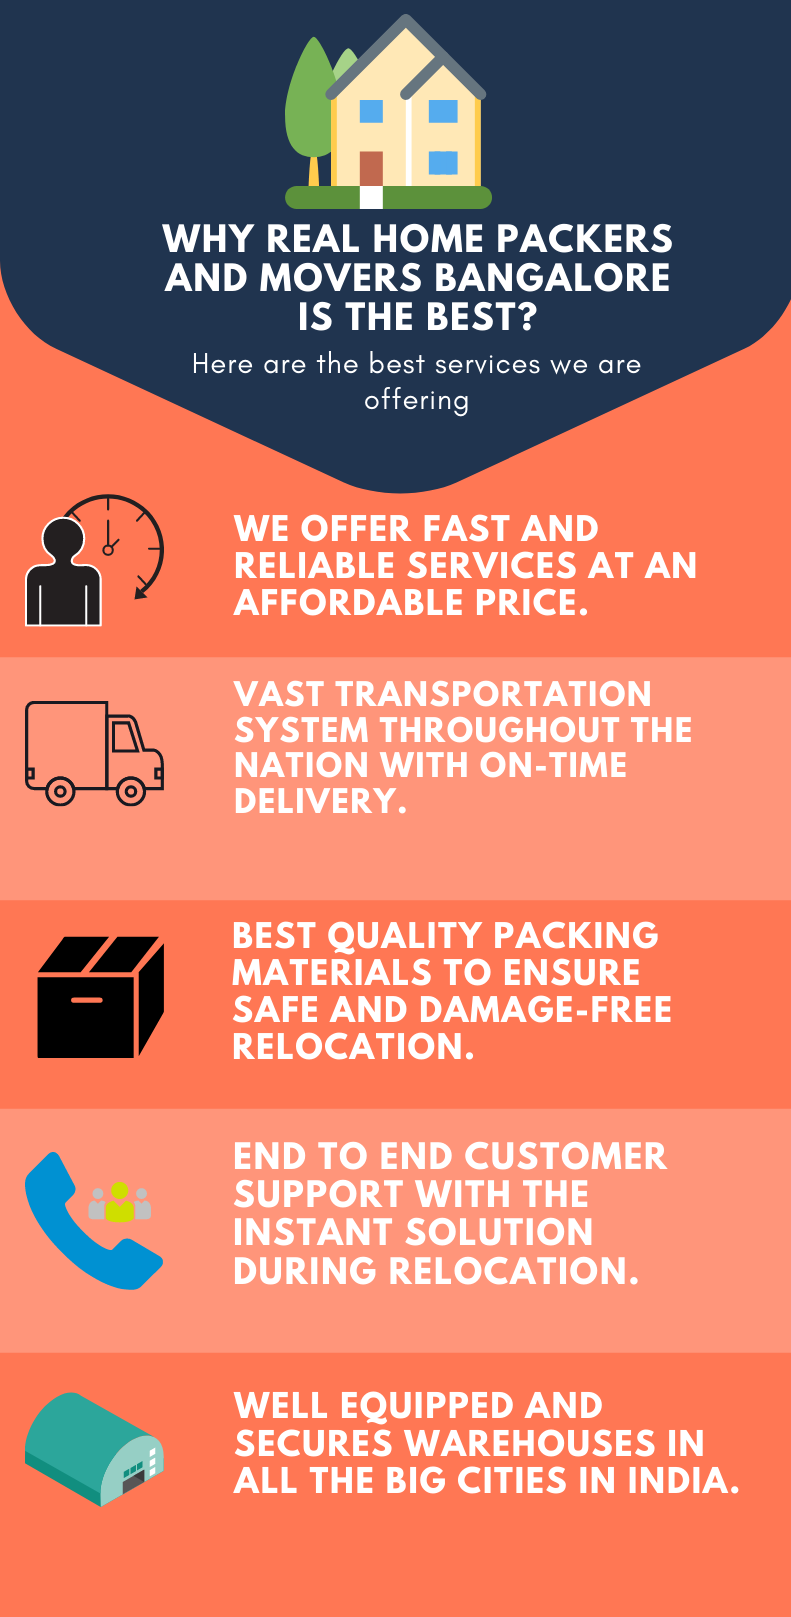 Why Real Home Packers and Movers Bangalore is the Best